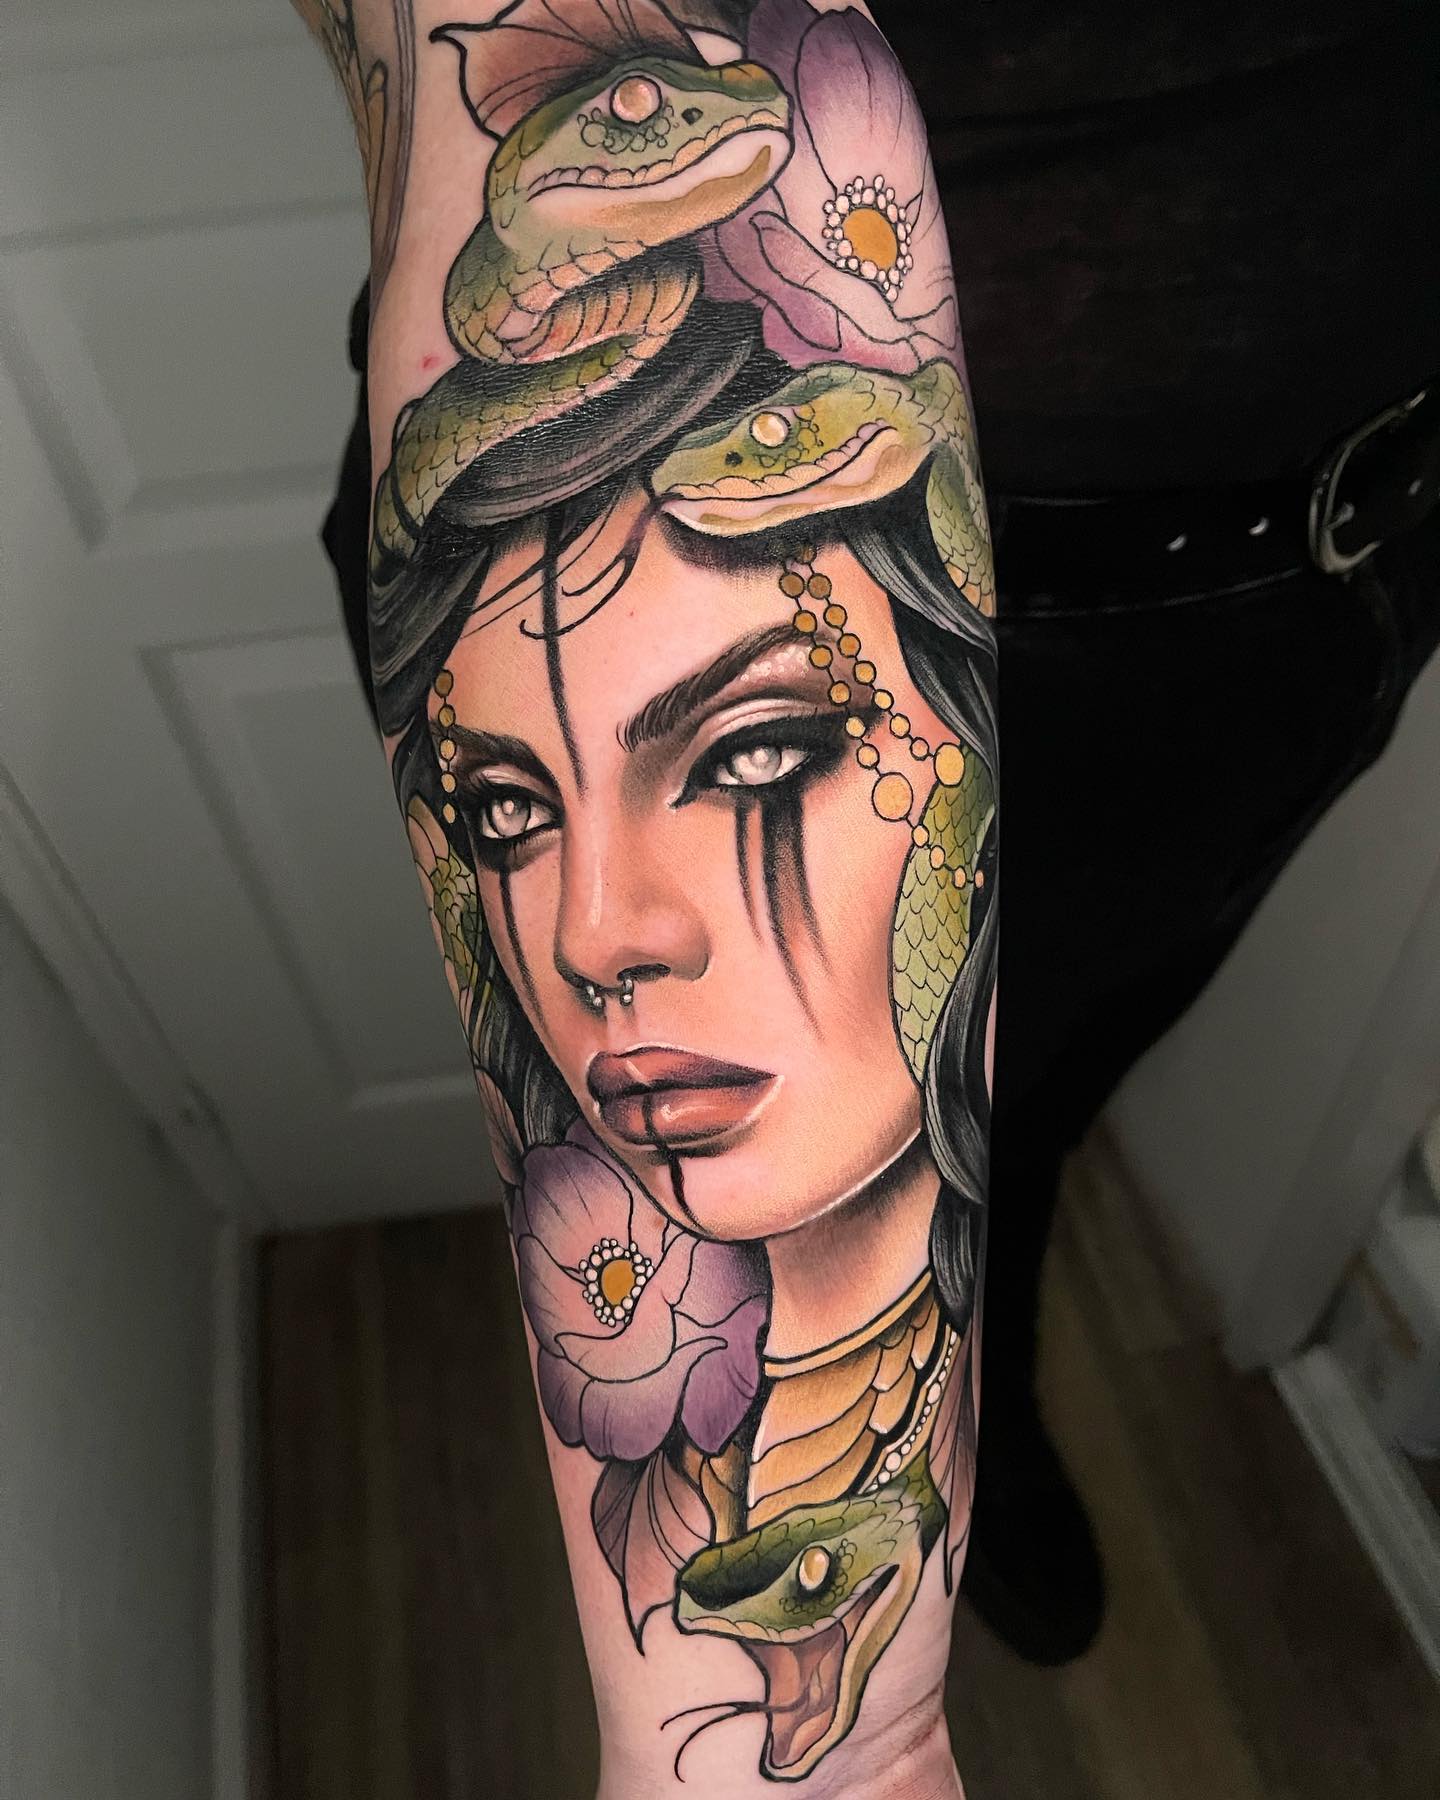 This tattoo makes you feel like if you touch it, you will feel Medusa for real. We are speechless since the artwork is extraordinary. The details under Medusa's eyes and on her lips offer an amazing look.